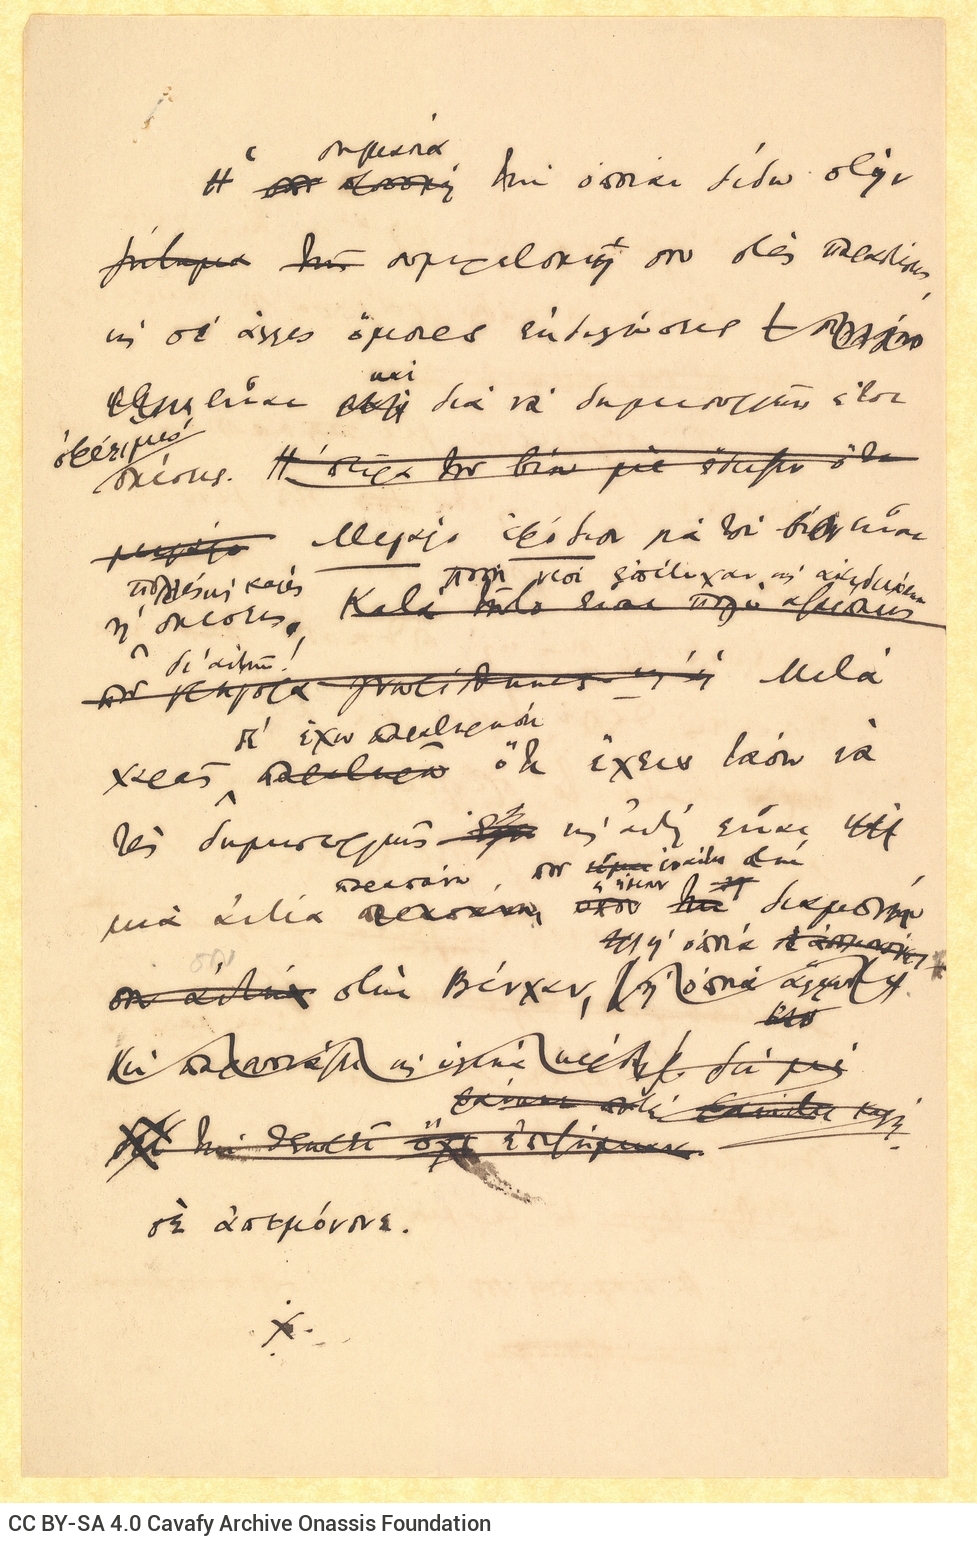 Draft letter by Cavafy to Alekos [Singopoulo] on the rectos of two sheets and on both sides of a third sheet. The poet asks f